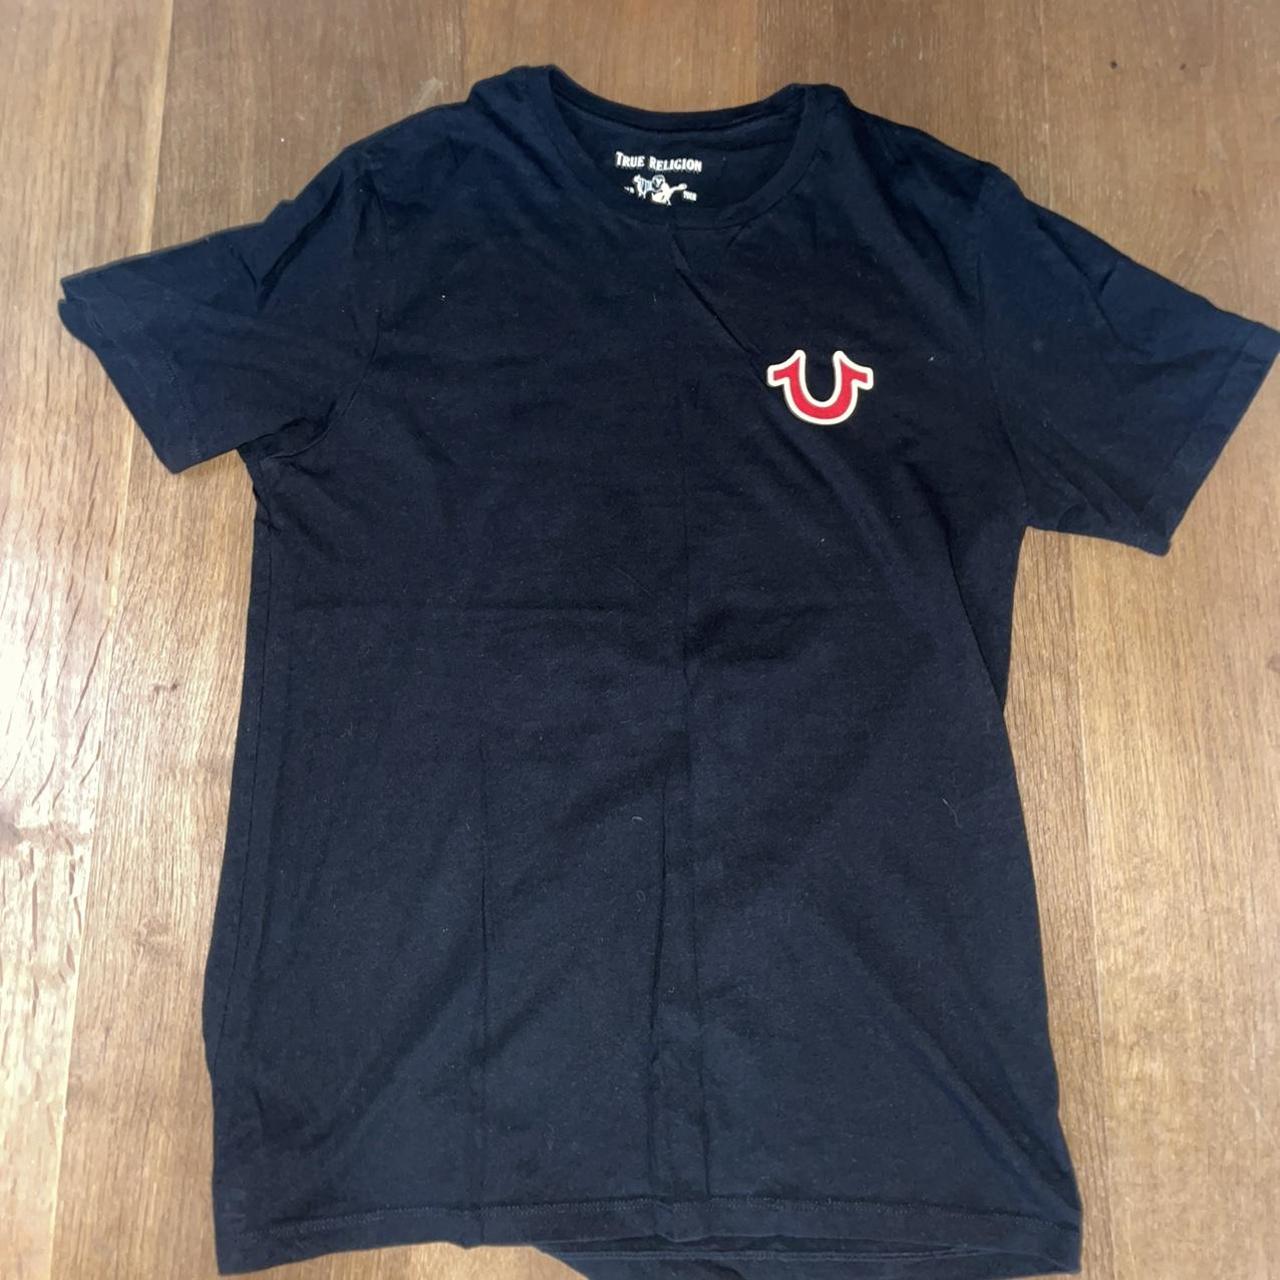 True religion t shirt Size small Selling due to... - Depop